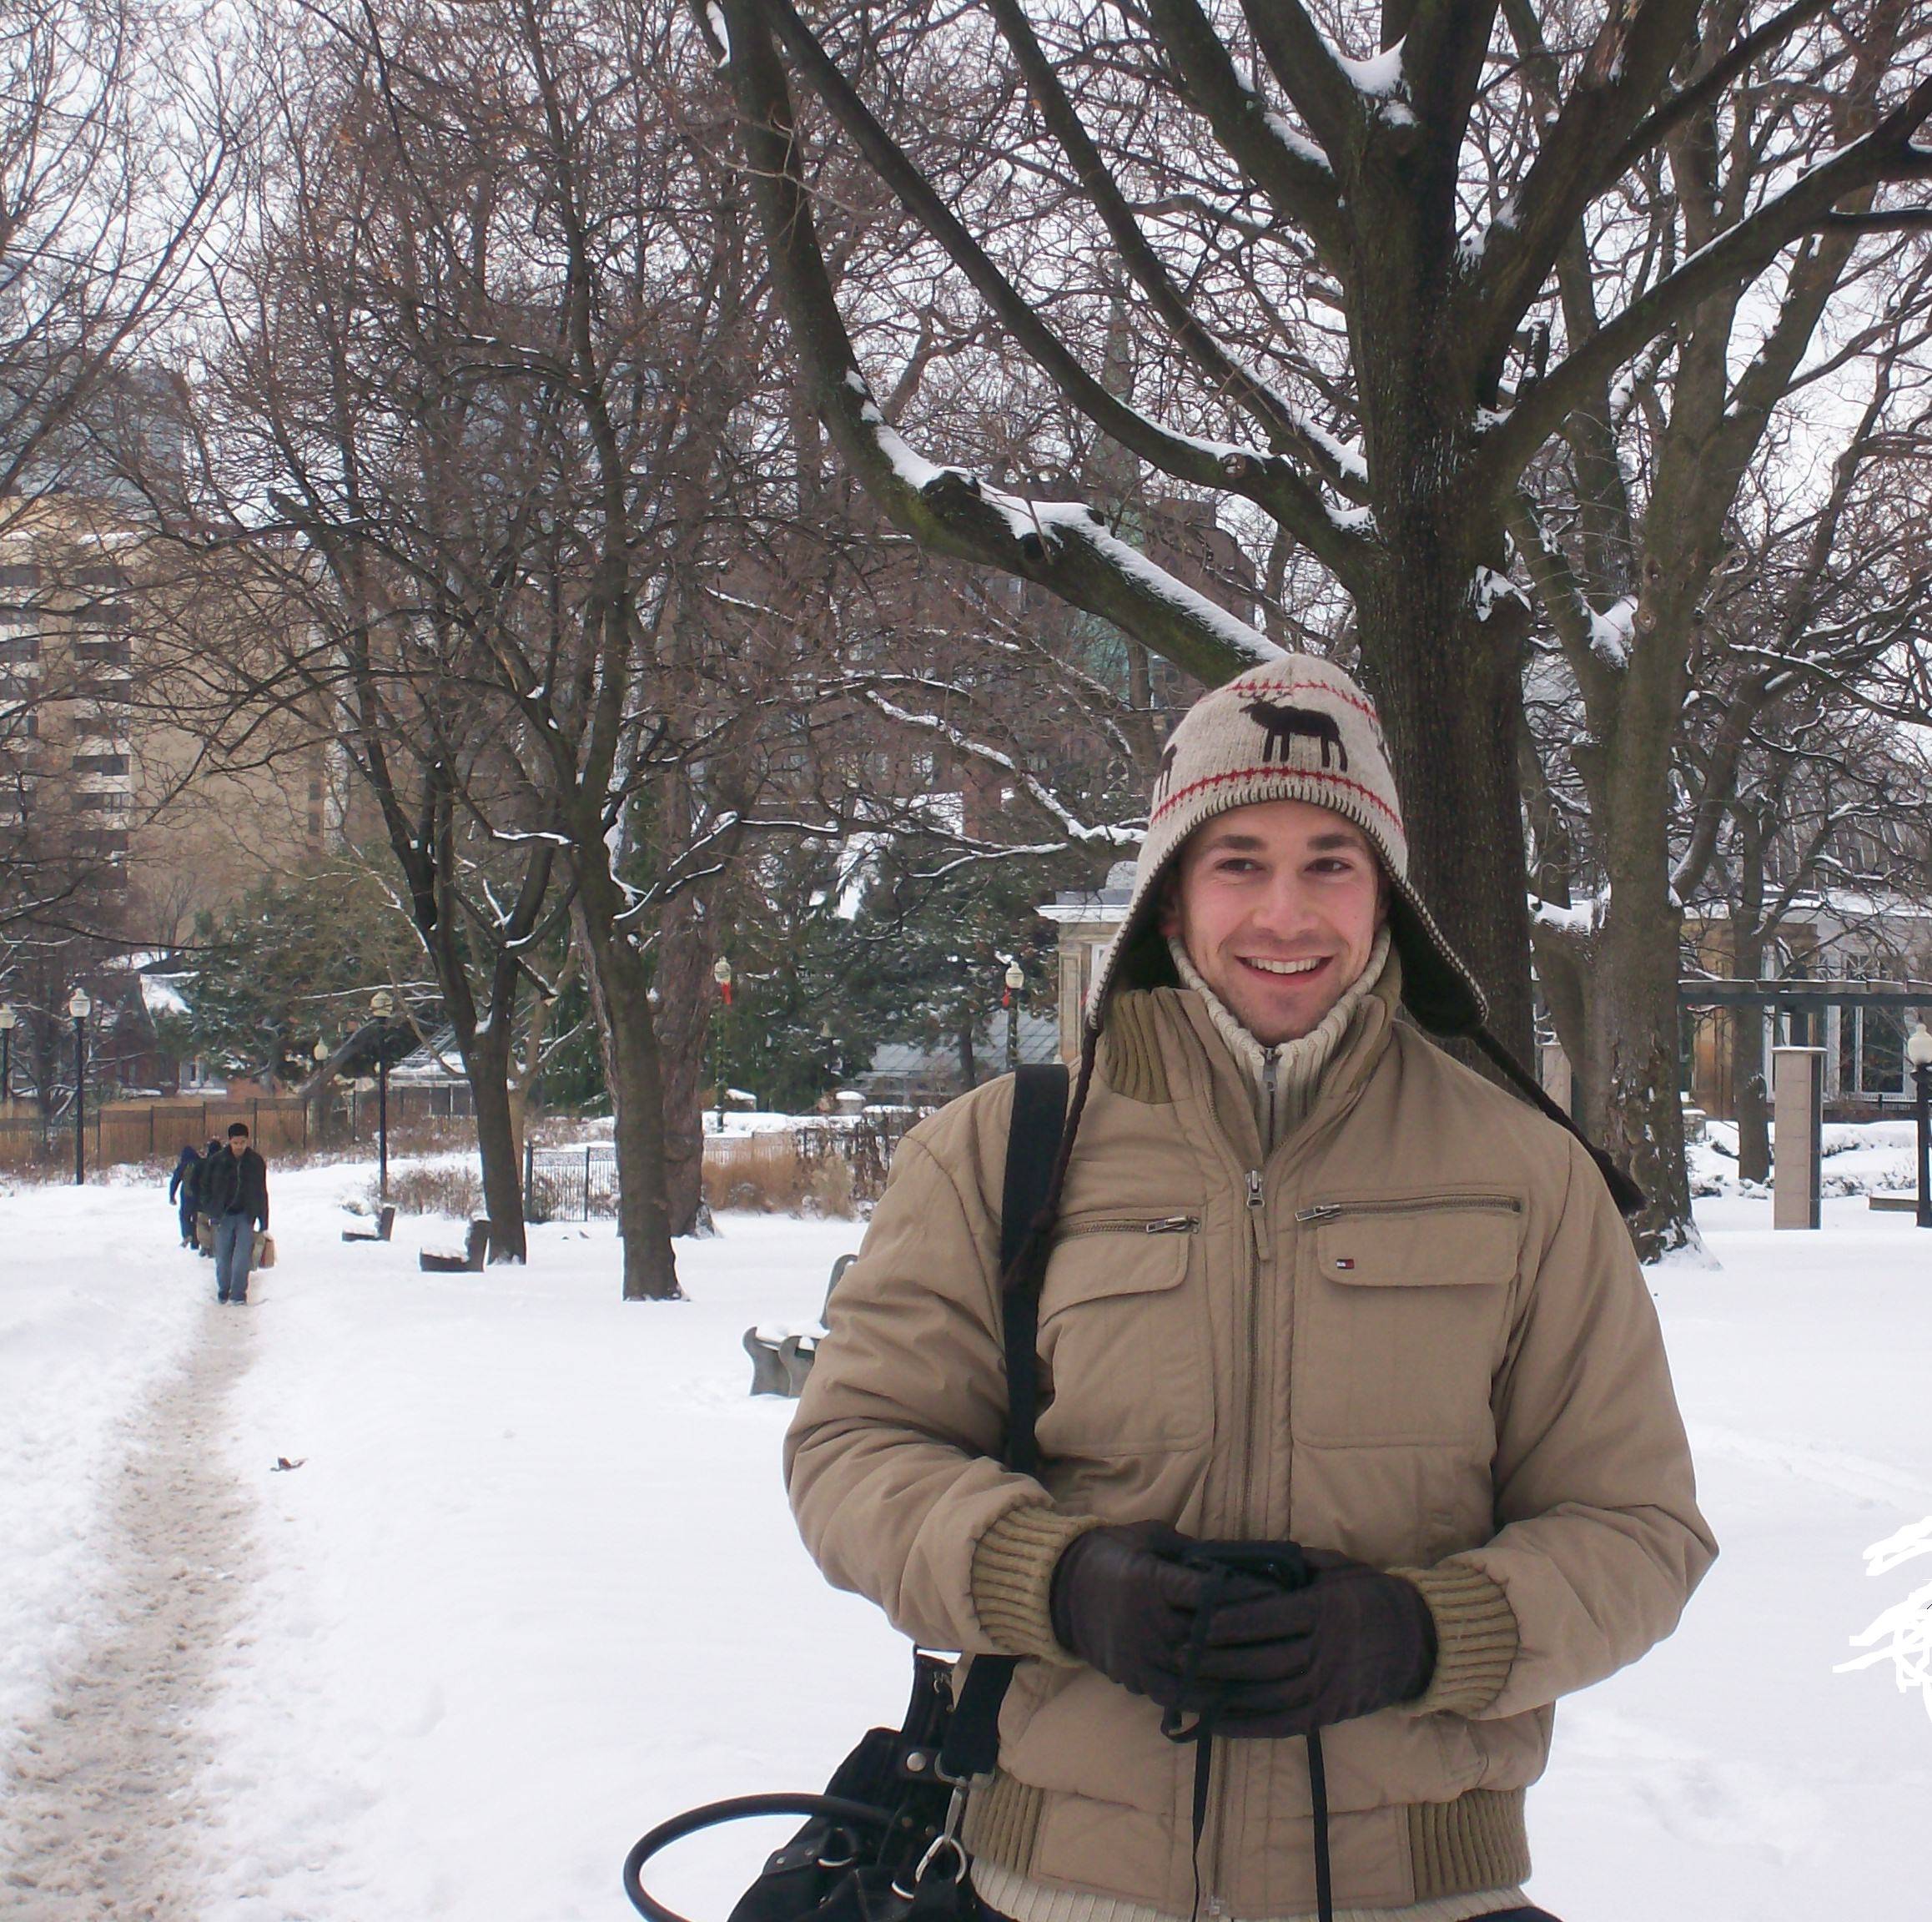 Man wearing anorak and gloves with a shoulder bag in snow, trees